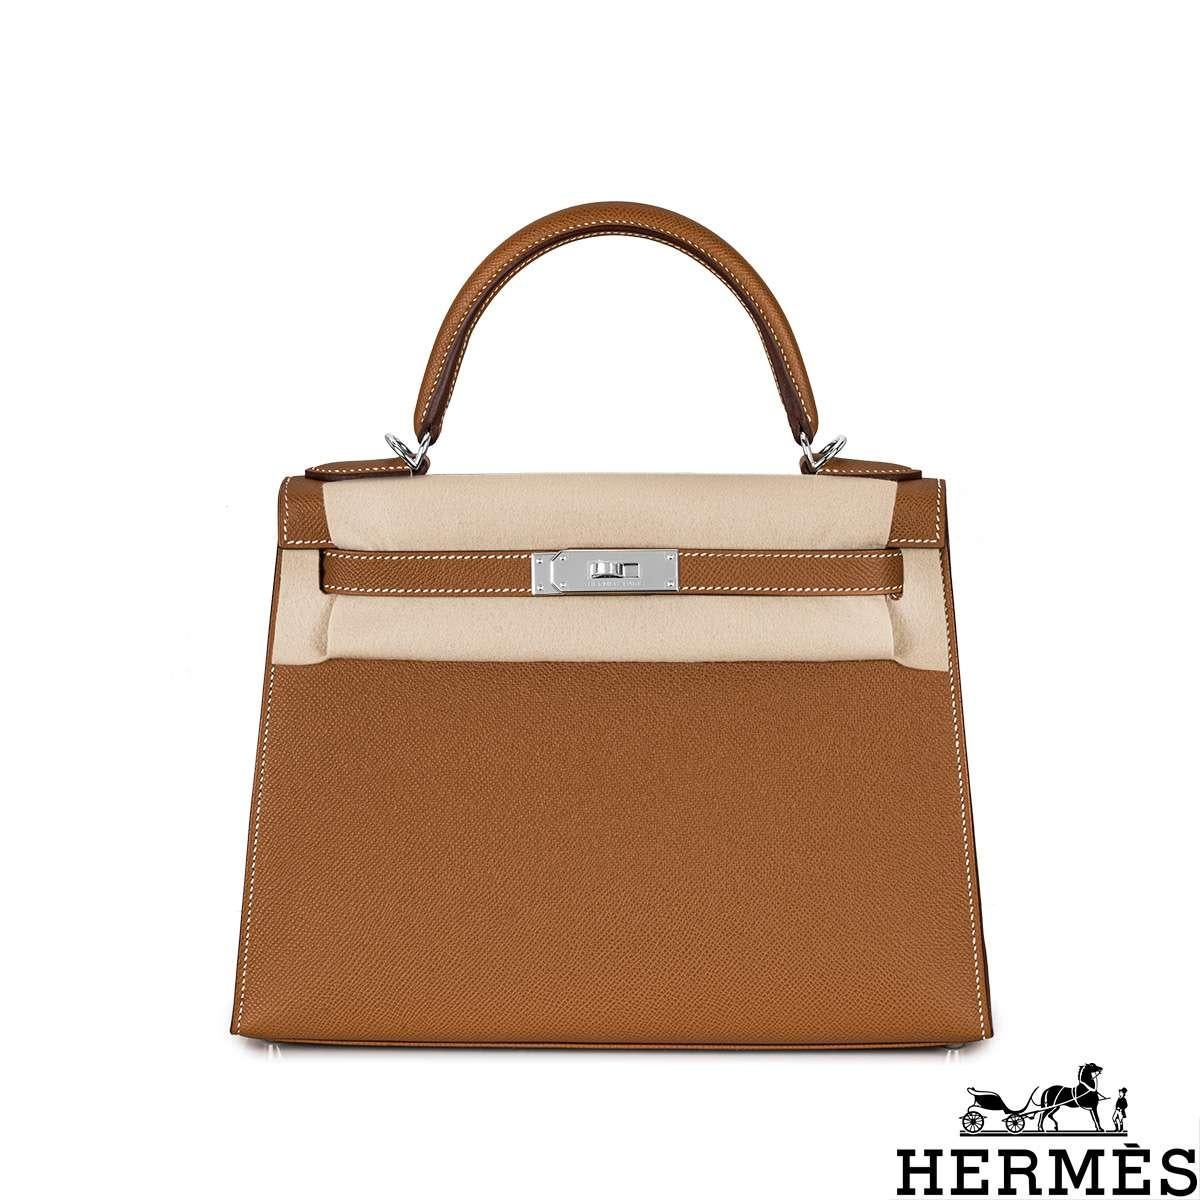 A classic Hermès Kelly II Sellier 28cm handbag. The exterior of this Kelly features the Sellier style in Gold Veau Epsom leather and is complemented by palladium hardware and white stitchings. It has a front toggle closure with two straps, a single